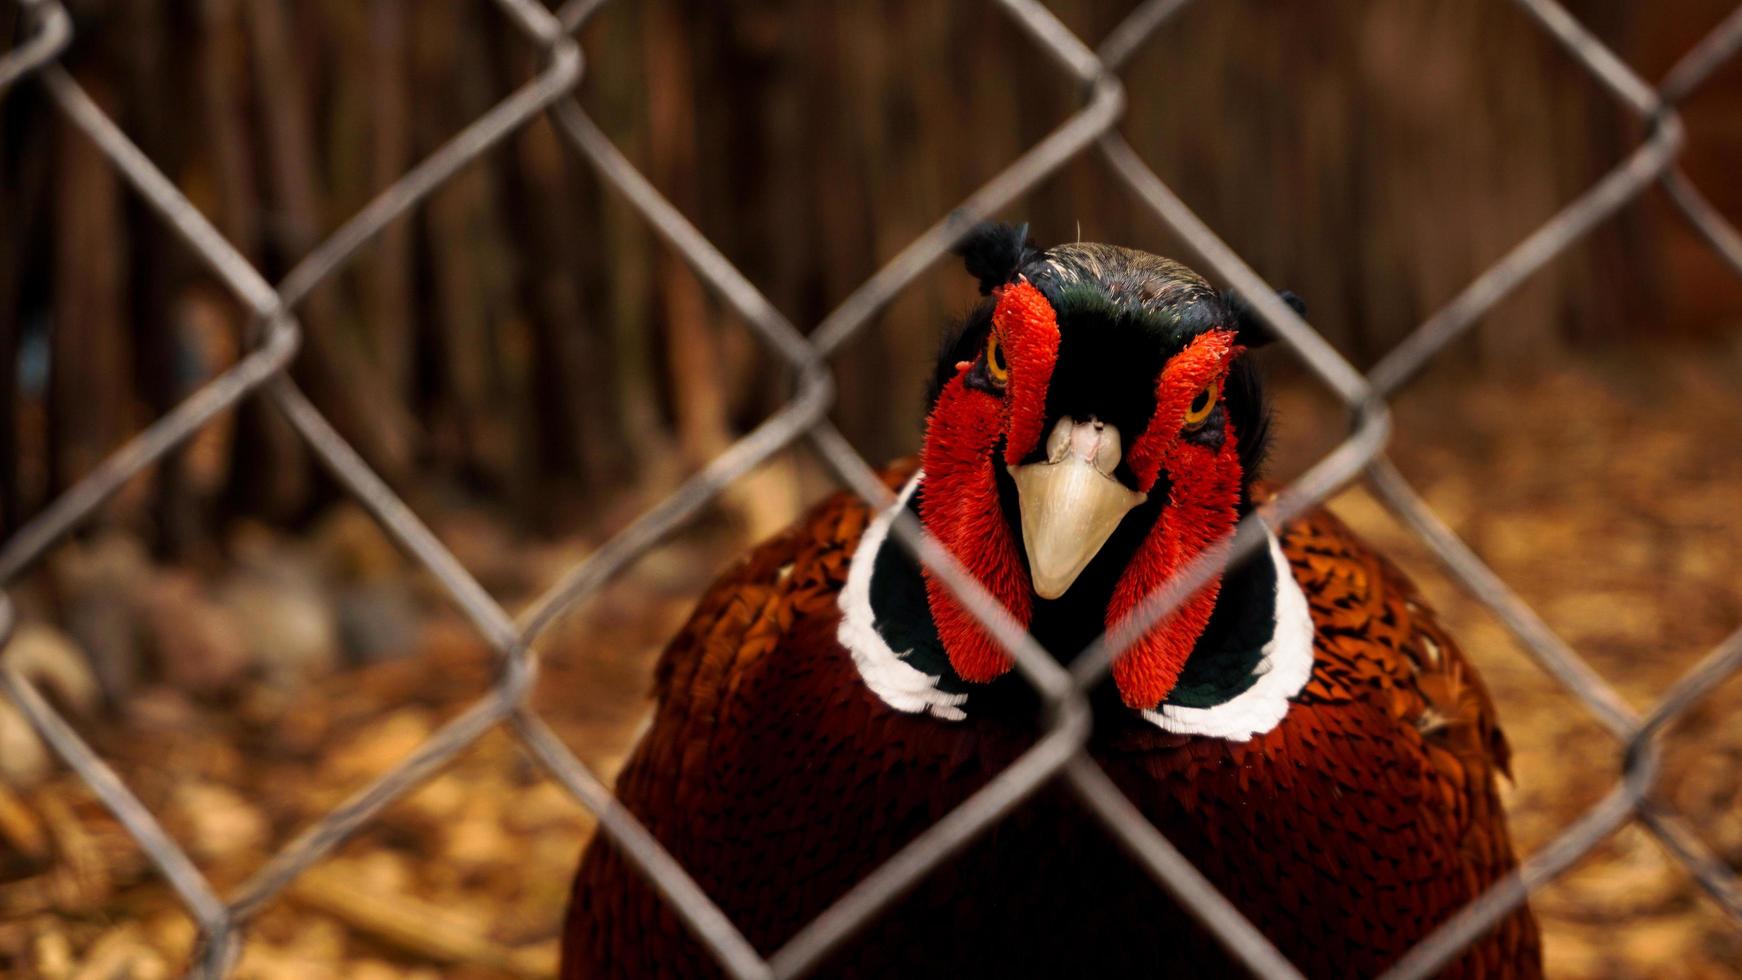 Hunting pheasant in a cage. Birds at the zoo or farm photo